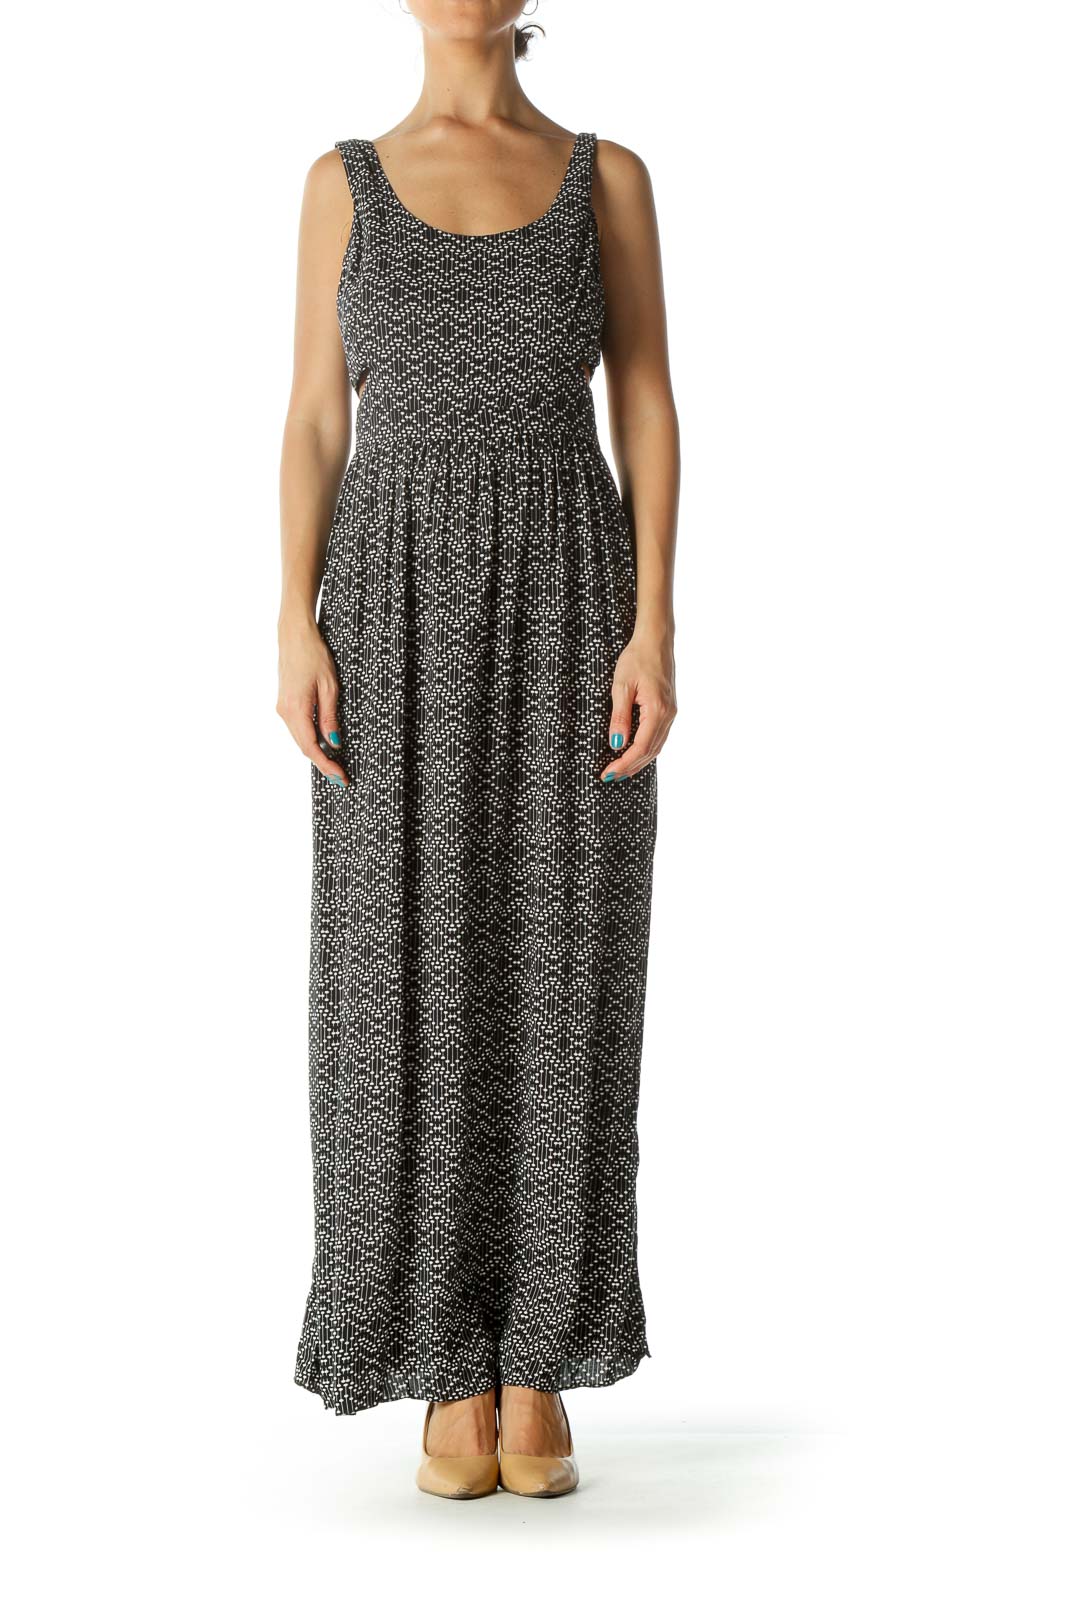 Black and White Print Cut-out Maxi Dress Front